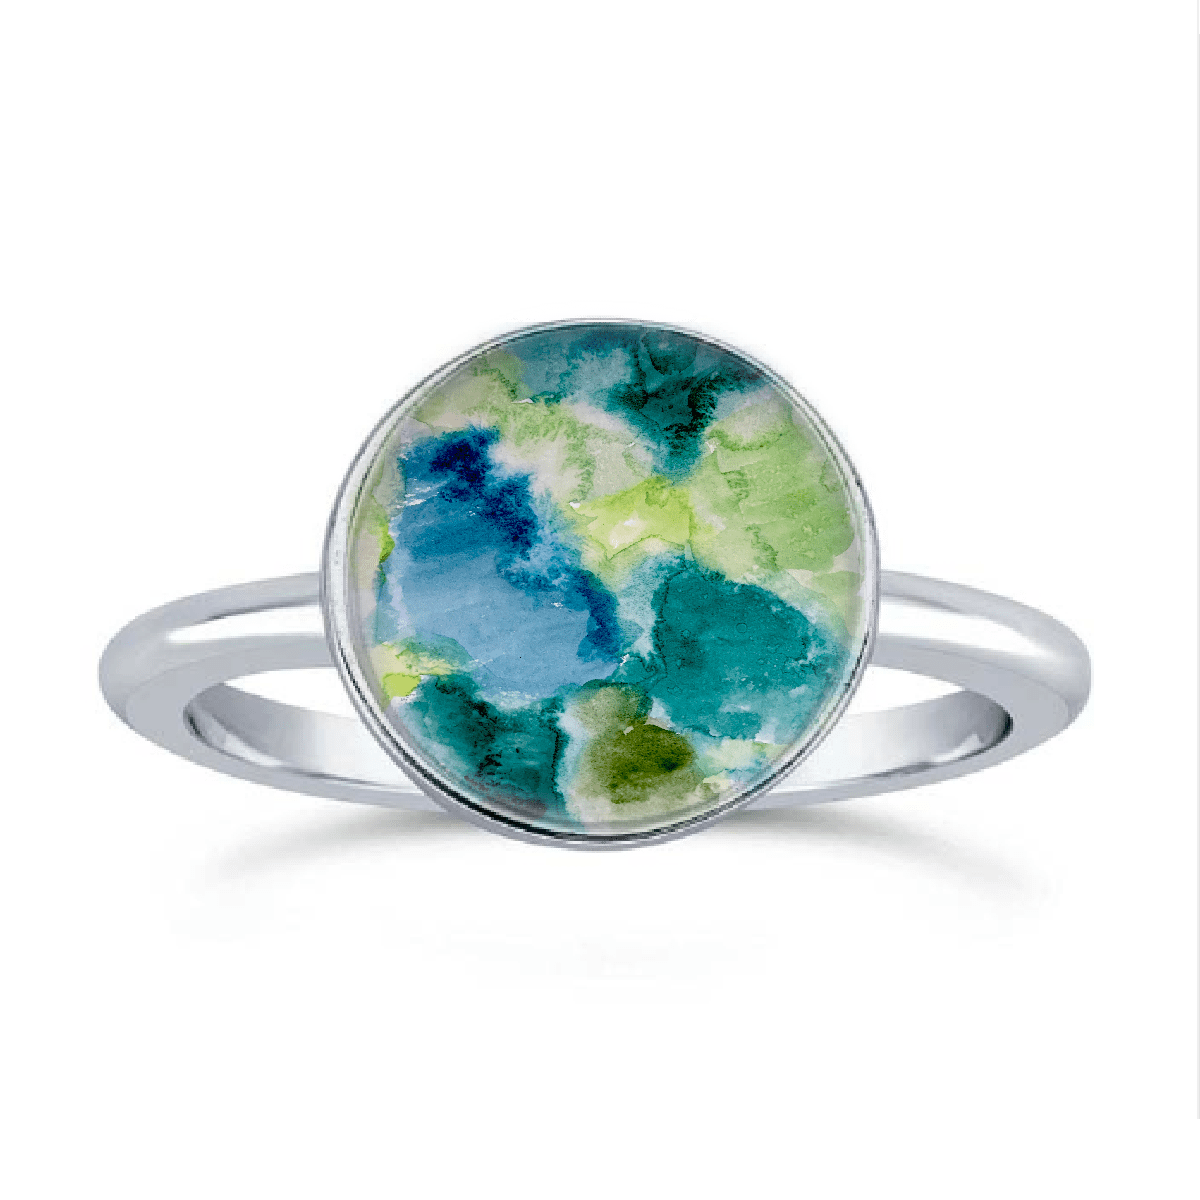 Abstract Art Ring by Kelly Kreger